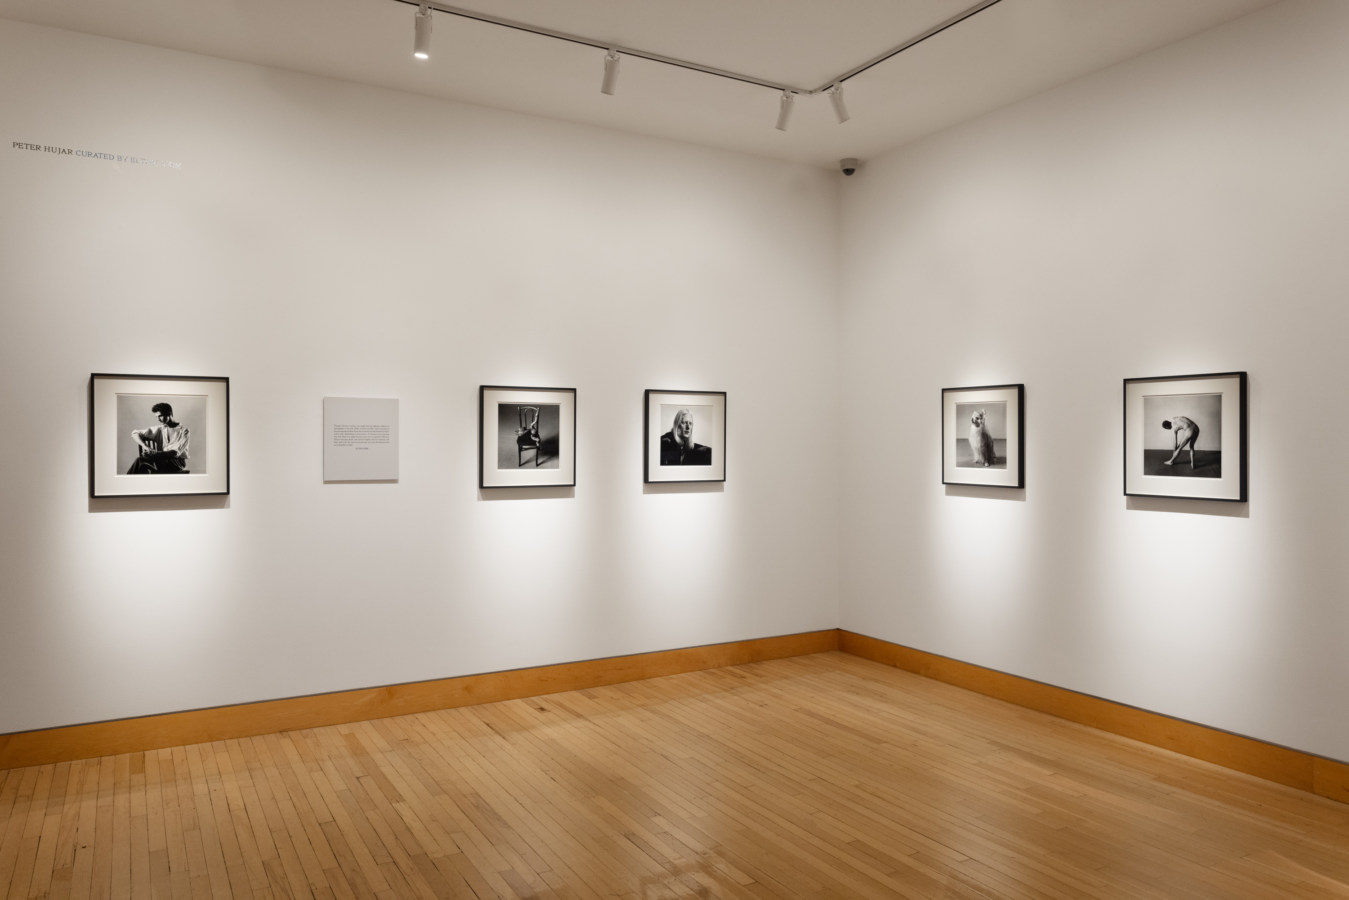 Color image of gallery with black and white photographs framed in black on white walls